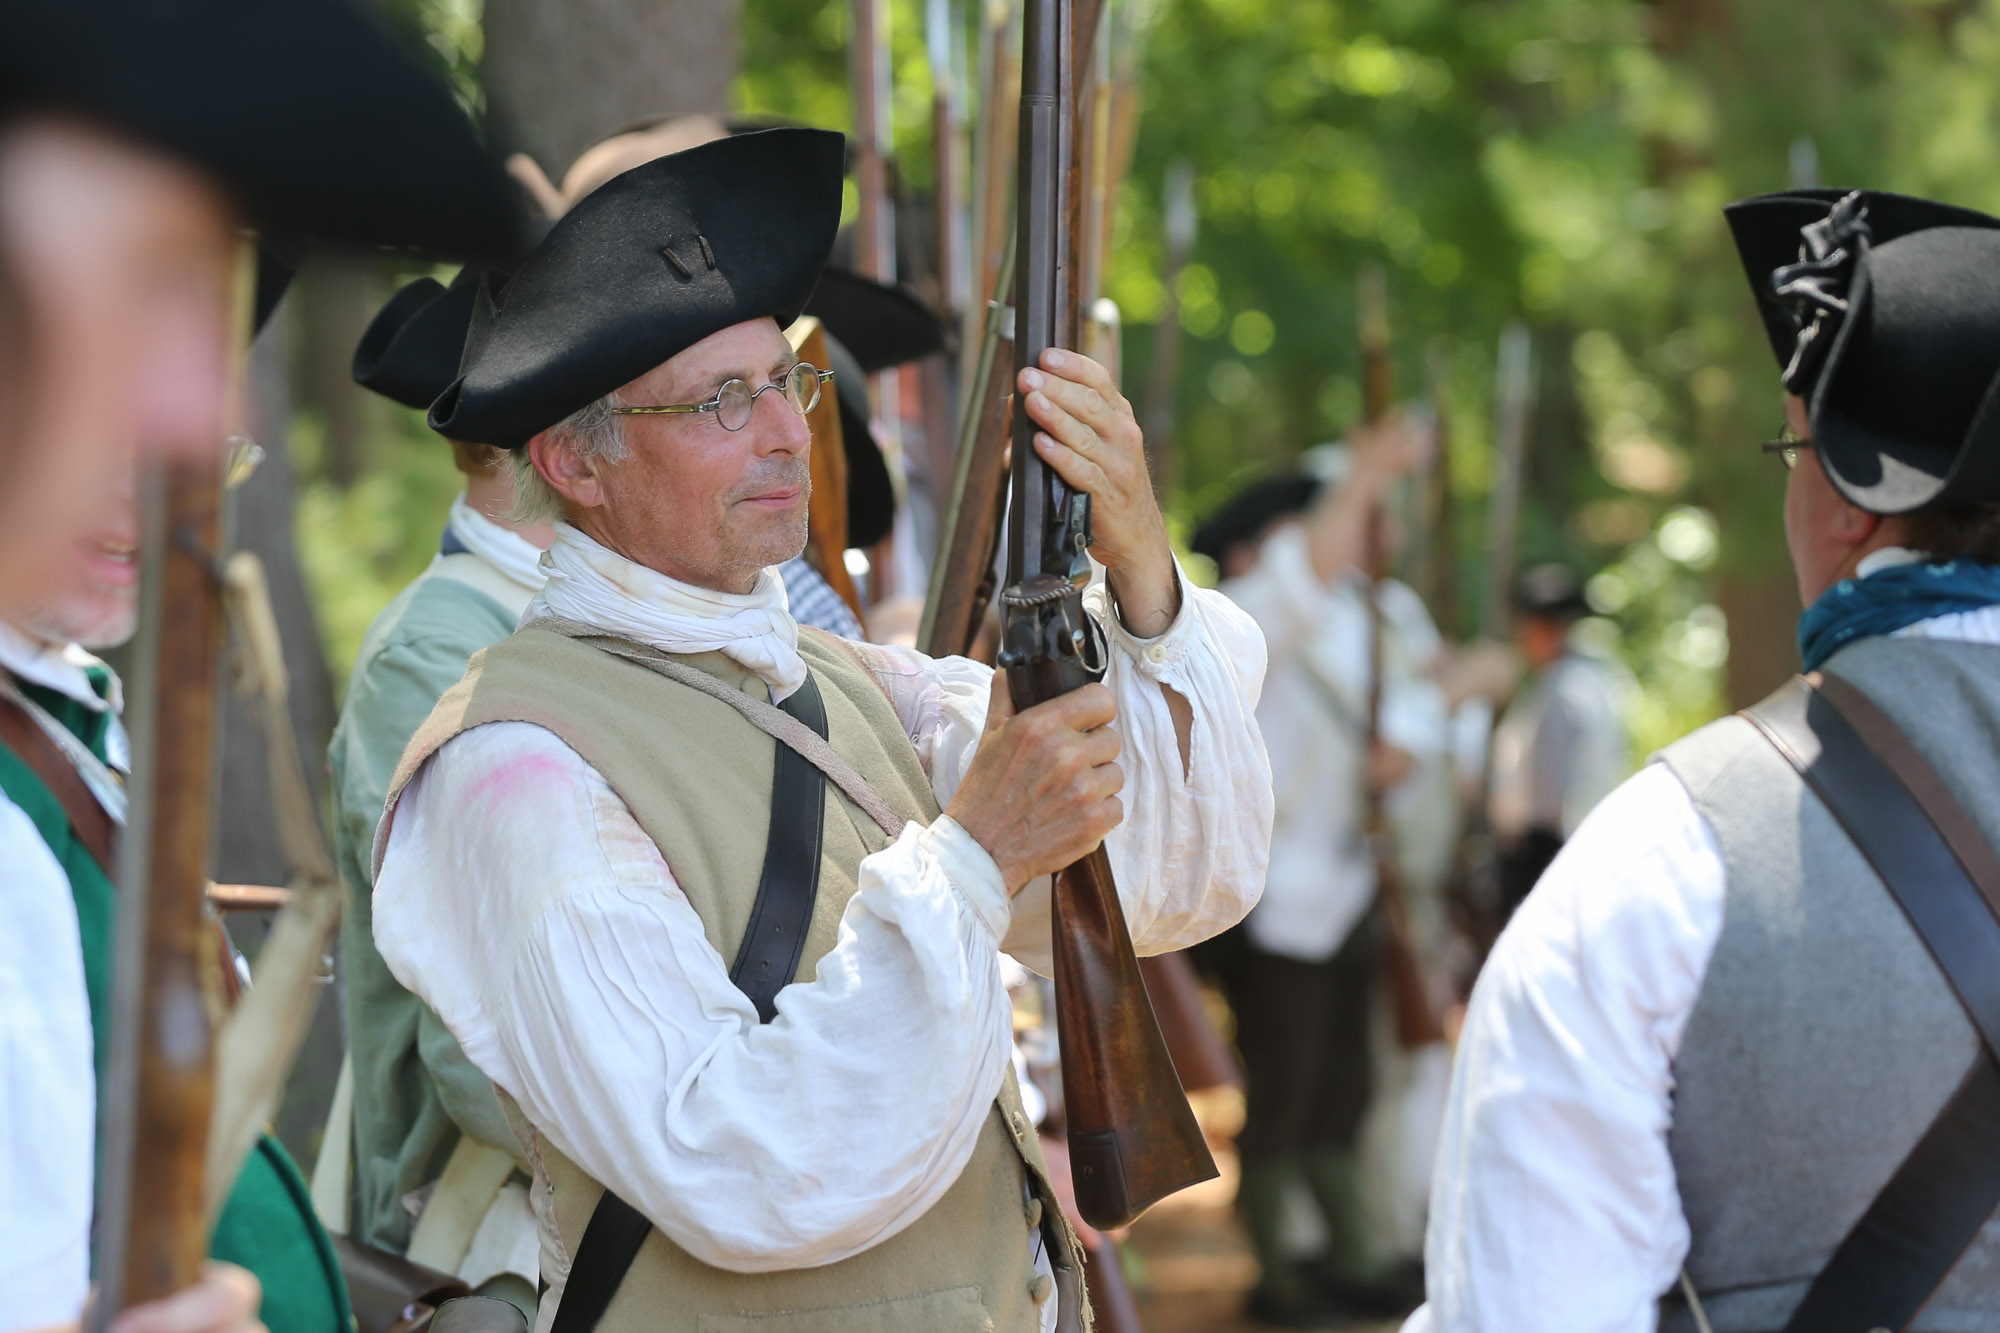 The Battle of Bunker Hill comes to Hudson